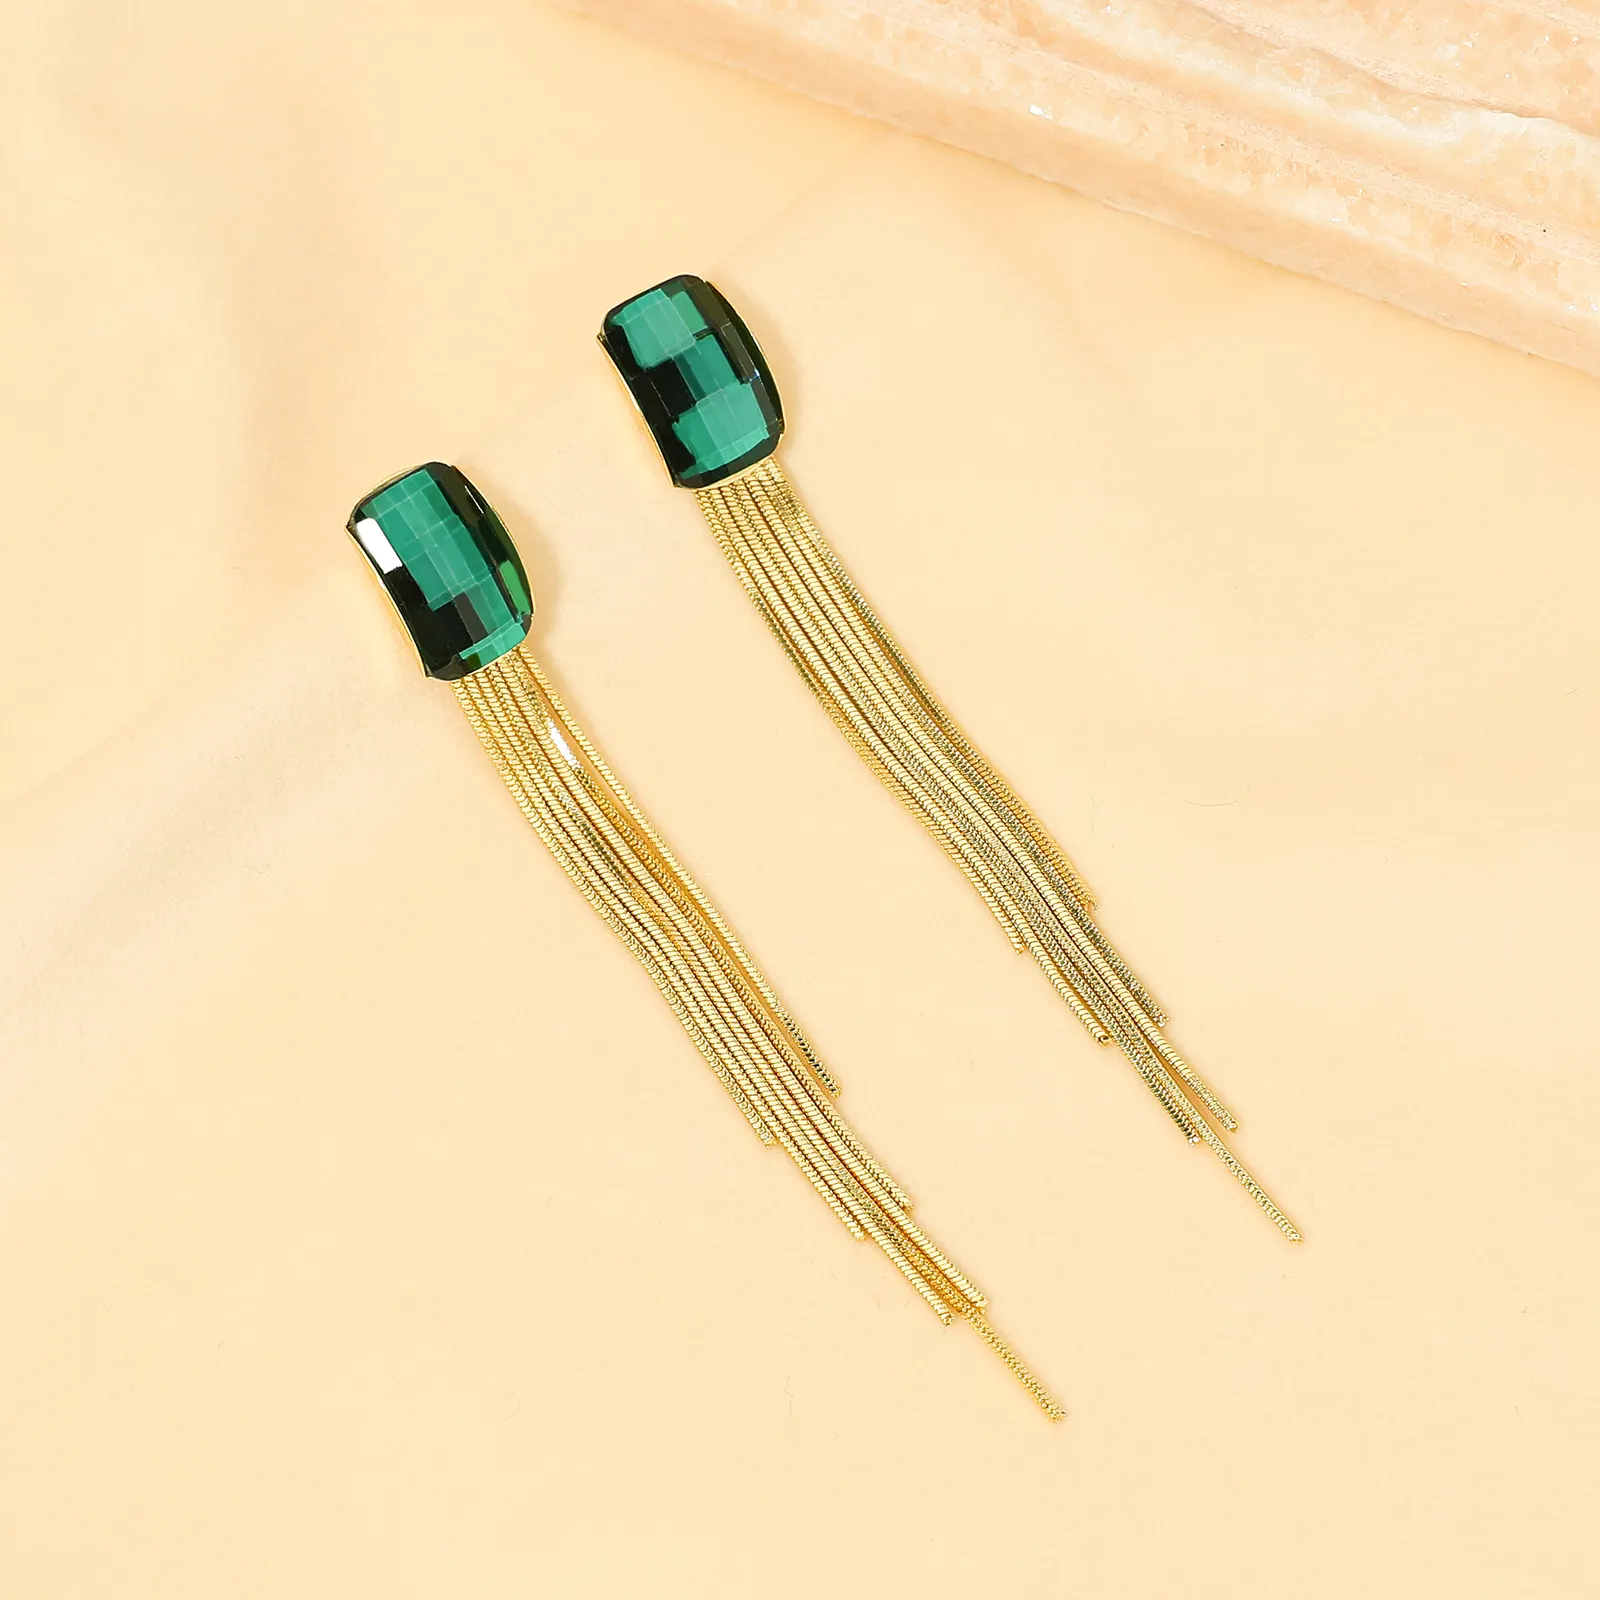 New Arrival Fashion Gold Plated Tassel Earring Statement Geometric Square Green Crystal Dangle Earrings